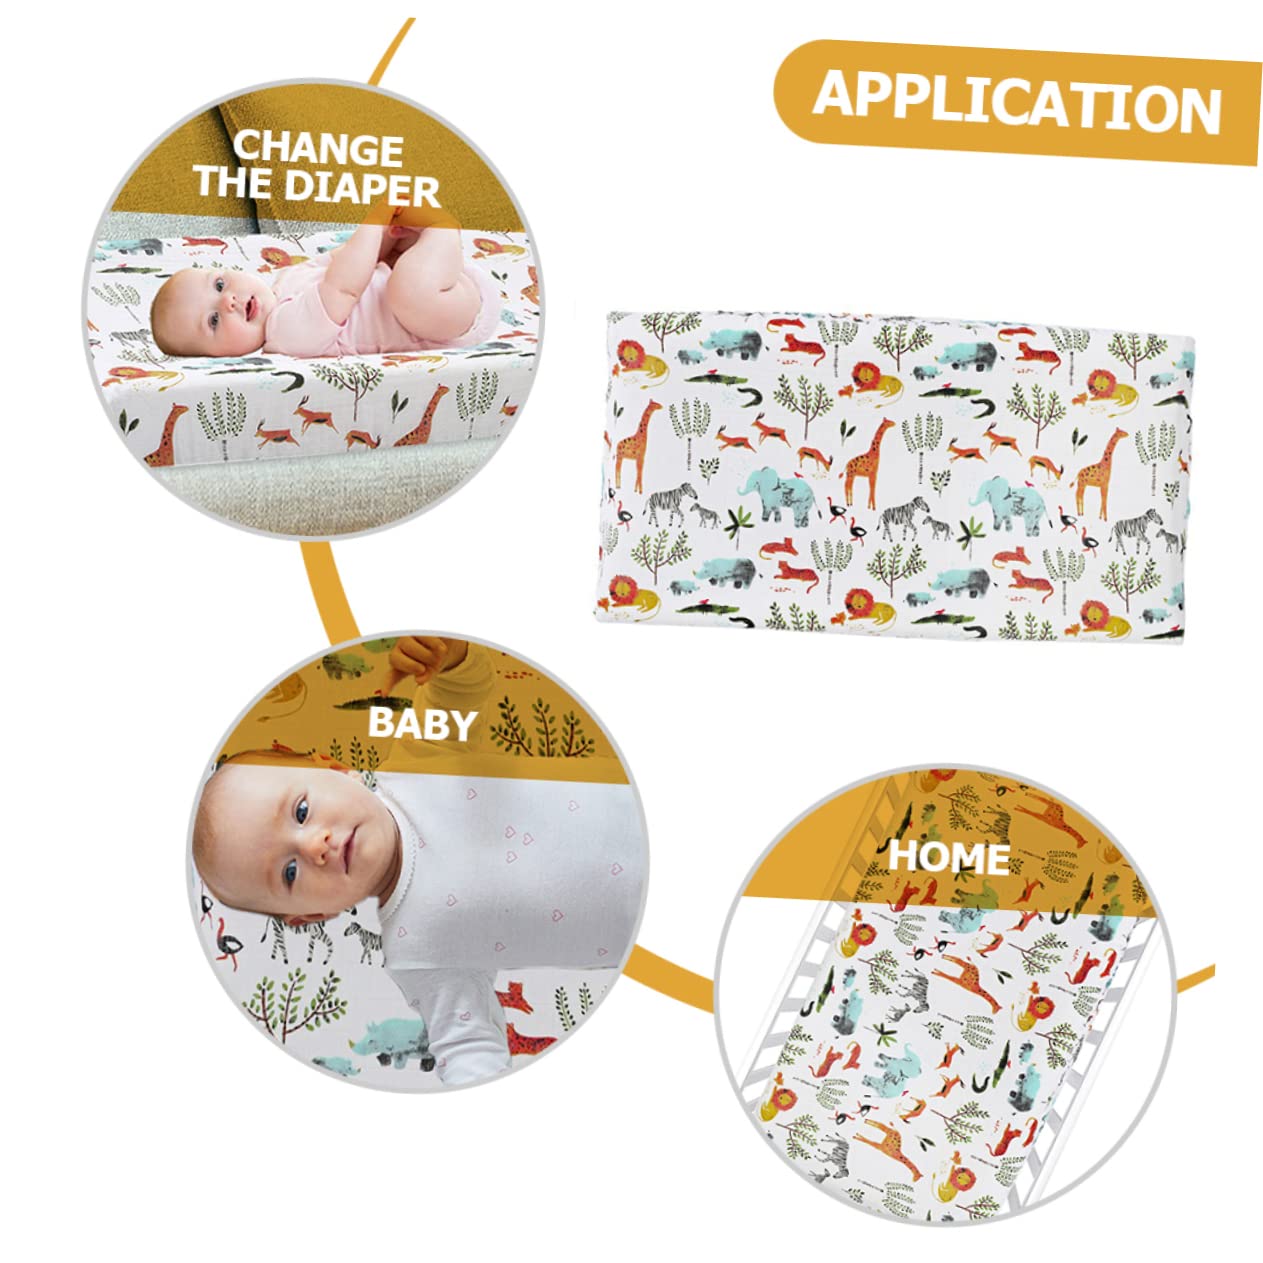 ERINGOGO Removable Fabric Cover Infant Diapers Changing Pad Cover Changing Table Cover Changing Table Pad Cover Changing Table Pads Printing Polyester Liner Baby